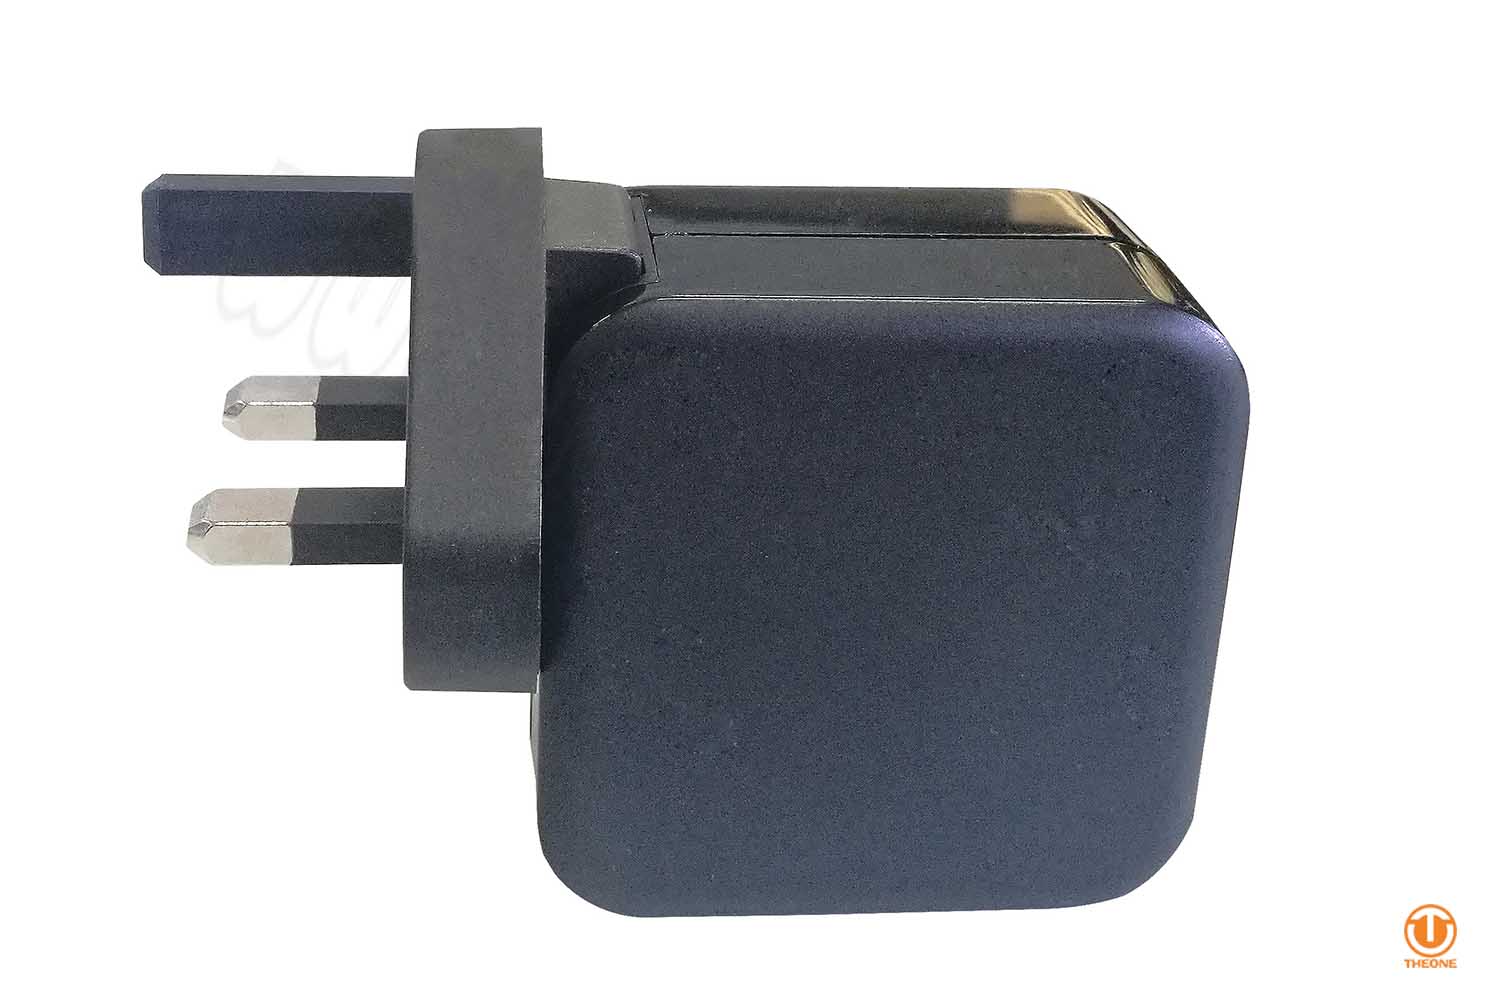 usb-c pd charger qc3.0 with interchangeable plugs